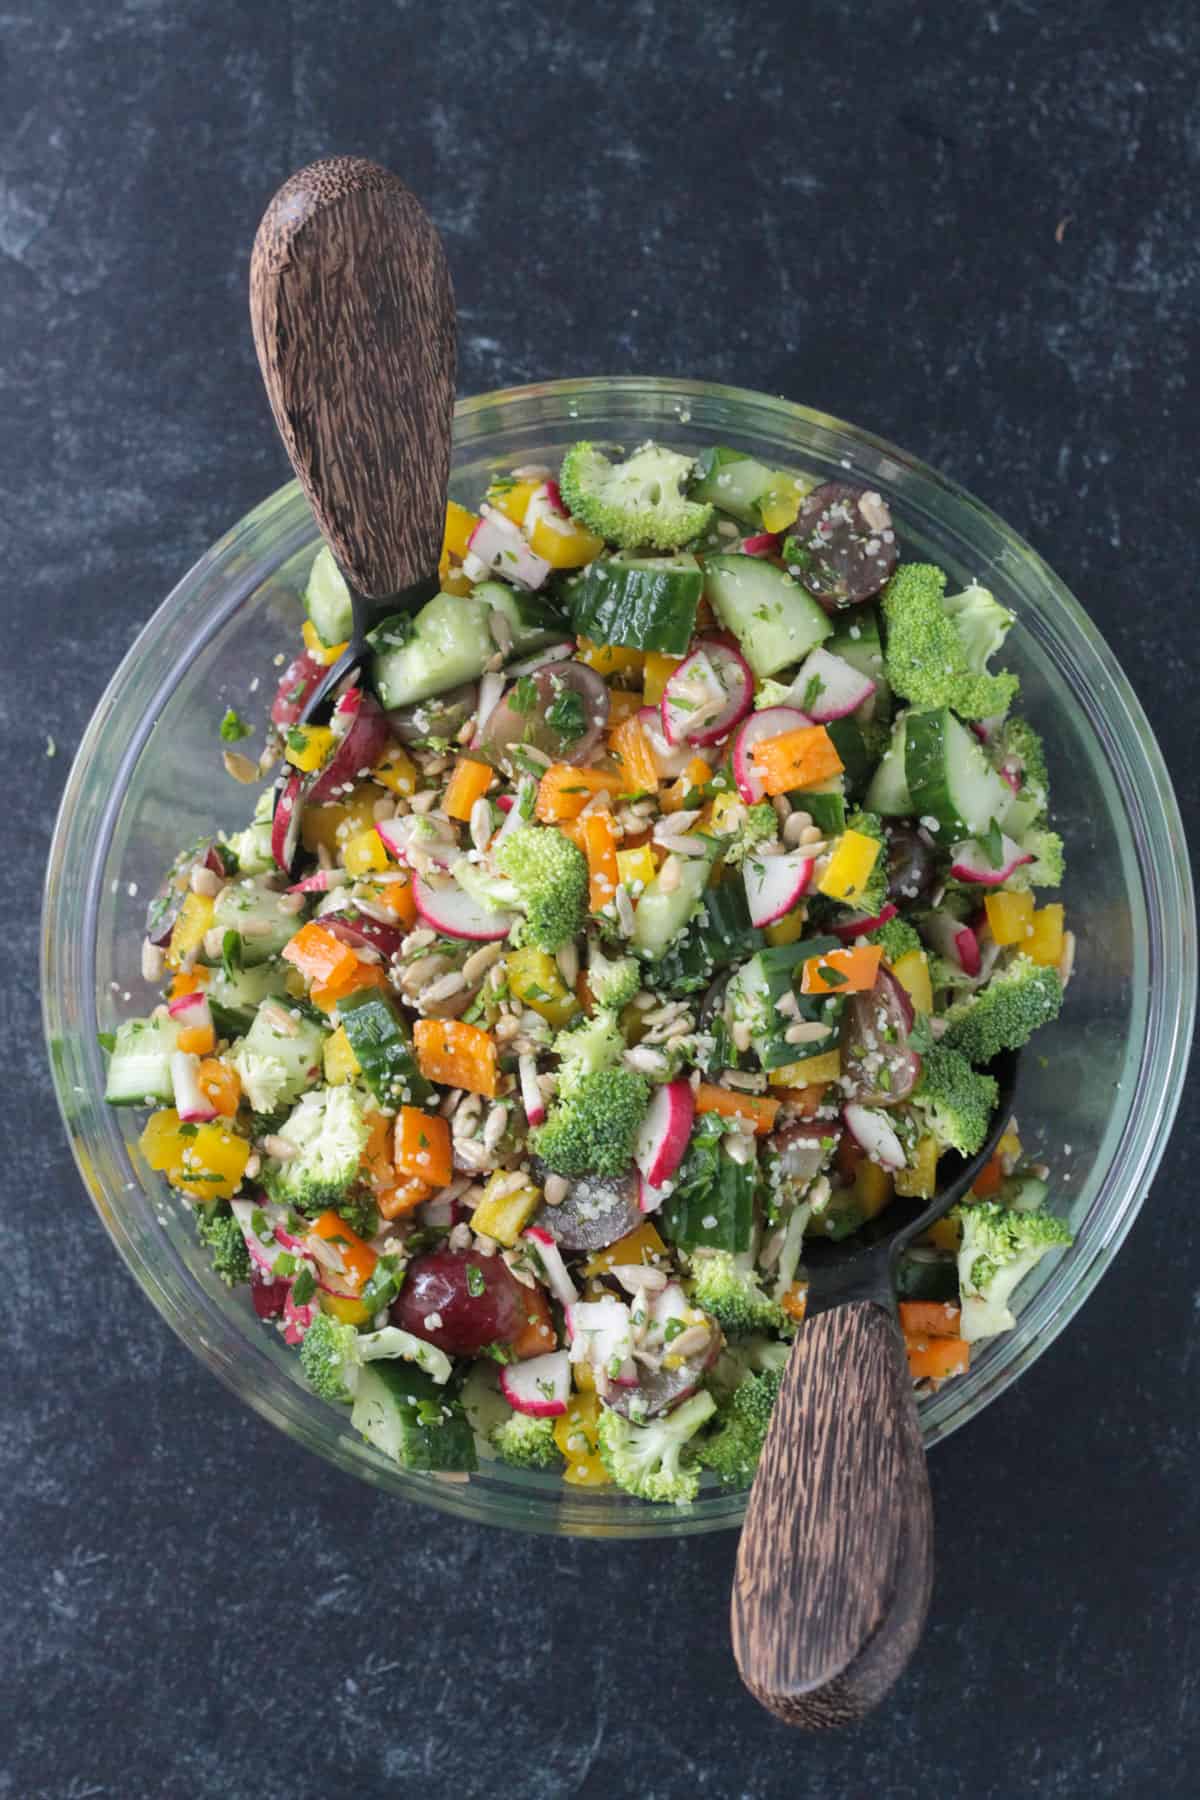 Chopped raw veggies mixed with vinaigrette in a glass bowl.